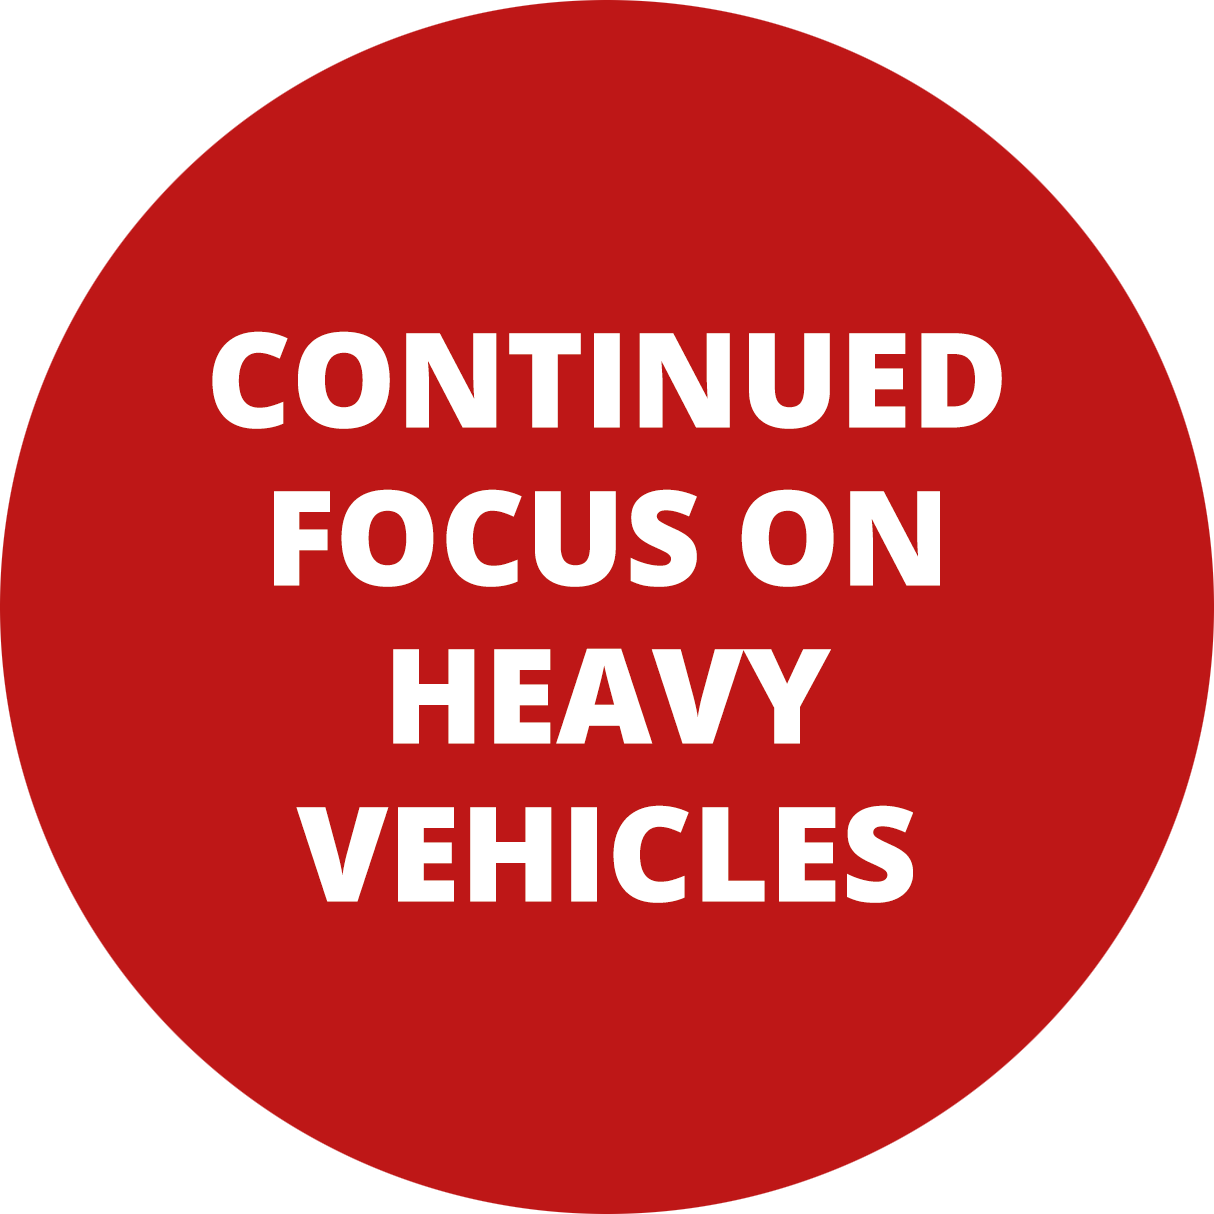 Continued focus on heavy vehicles